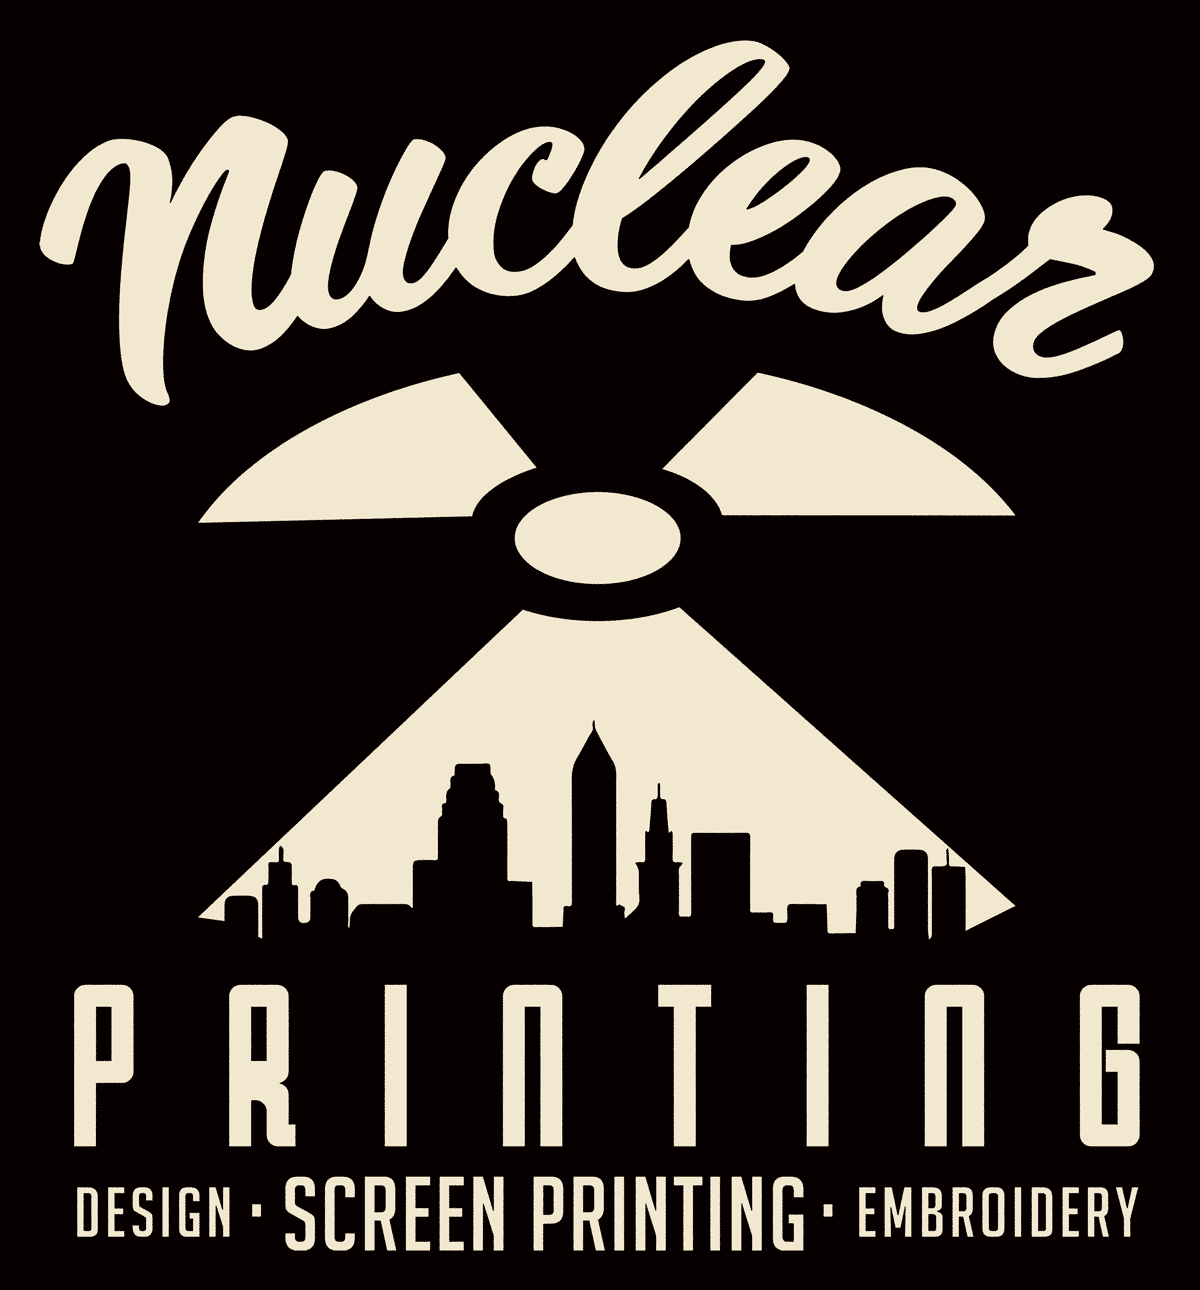 Nuclear Printing – Design, Screen Printing, Embroidery